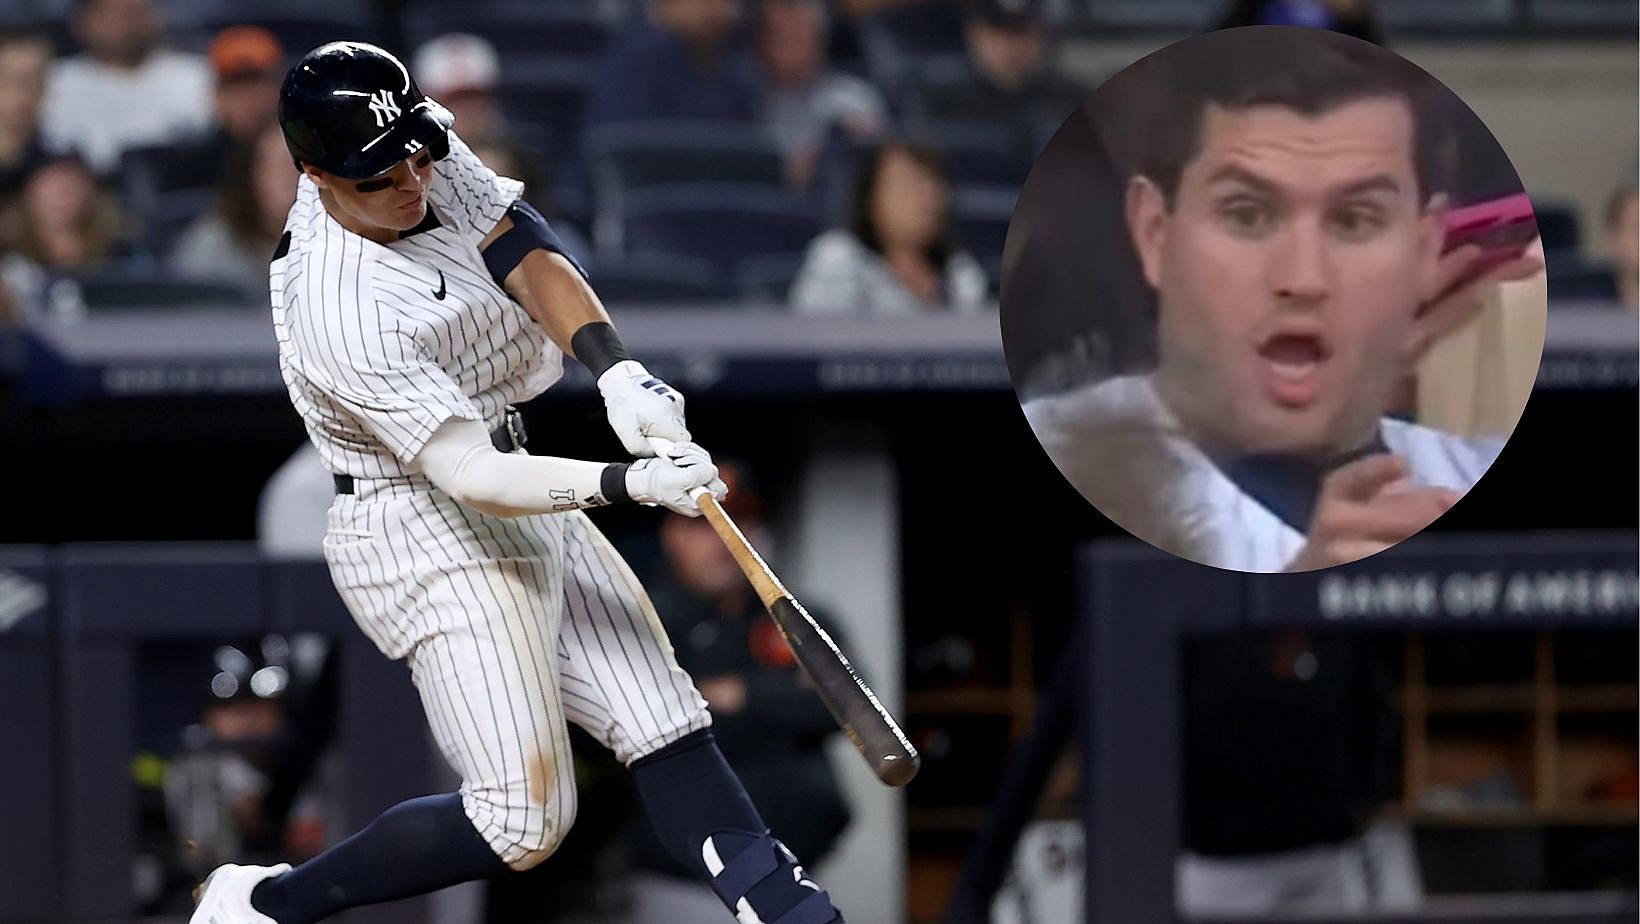 Official gleyber rizzo lemahieu bader judge trevino stanton